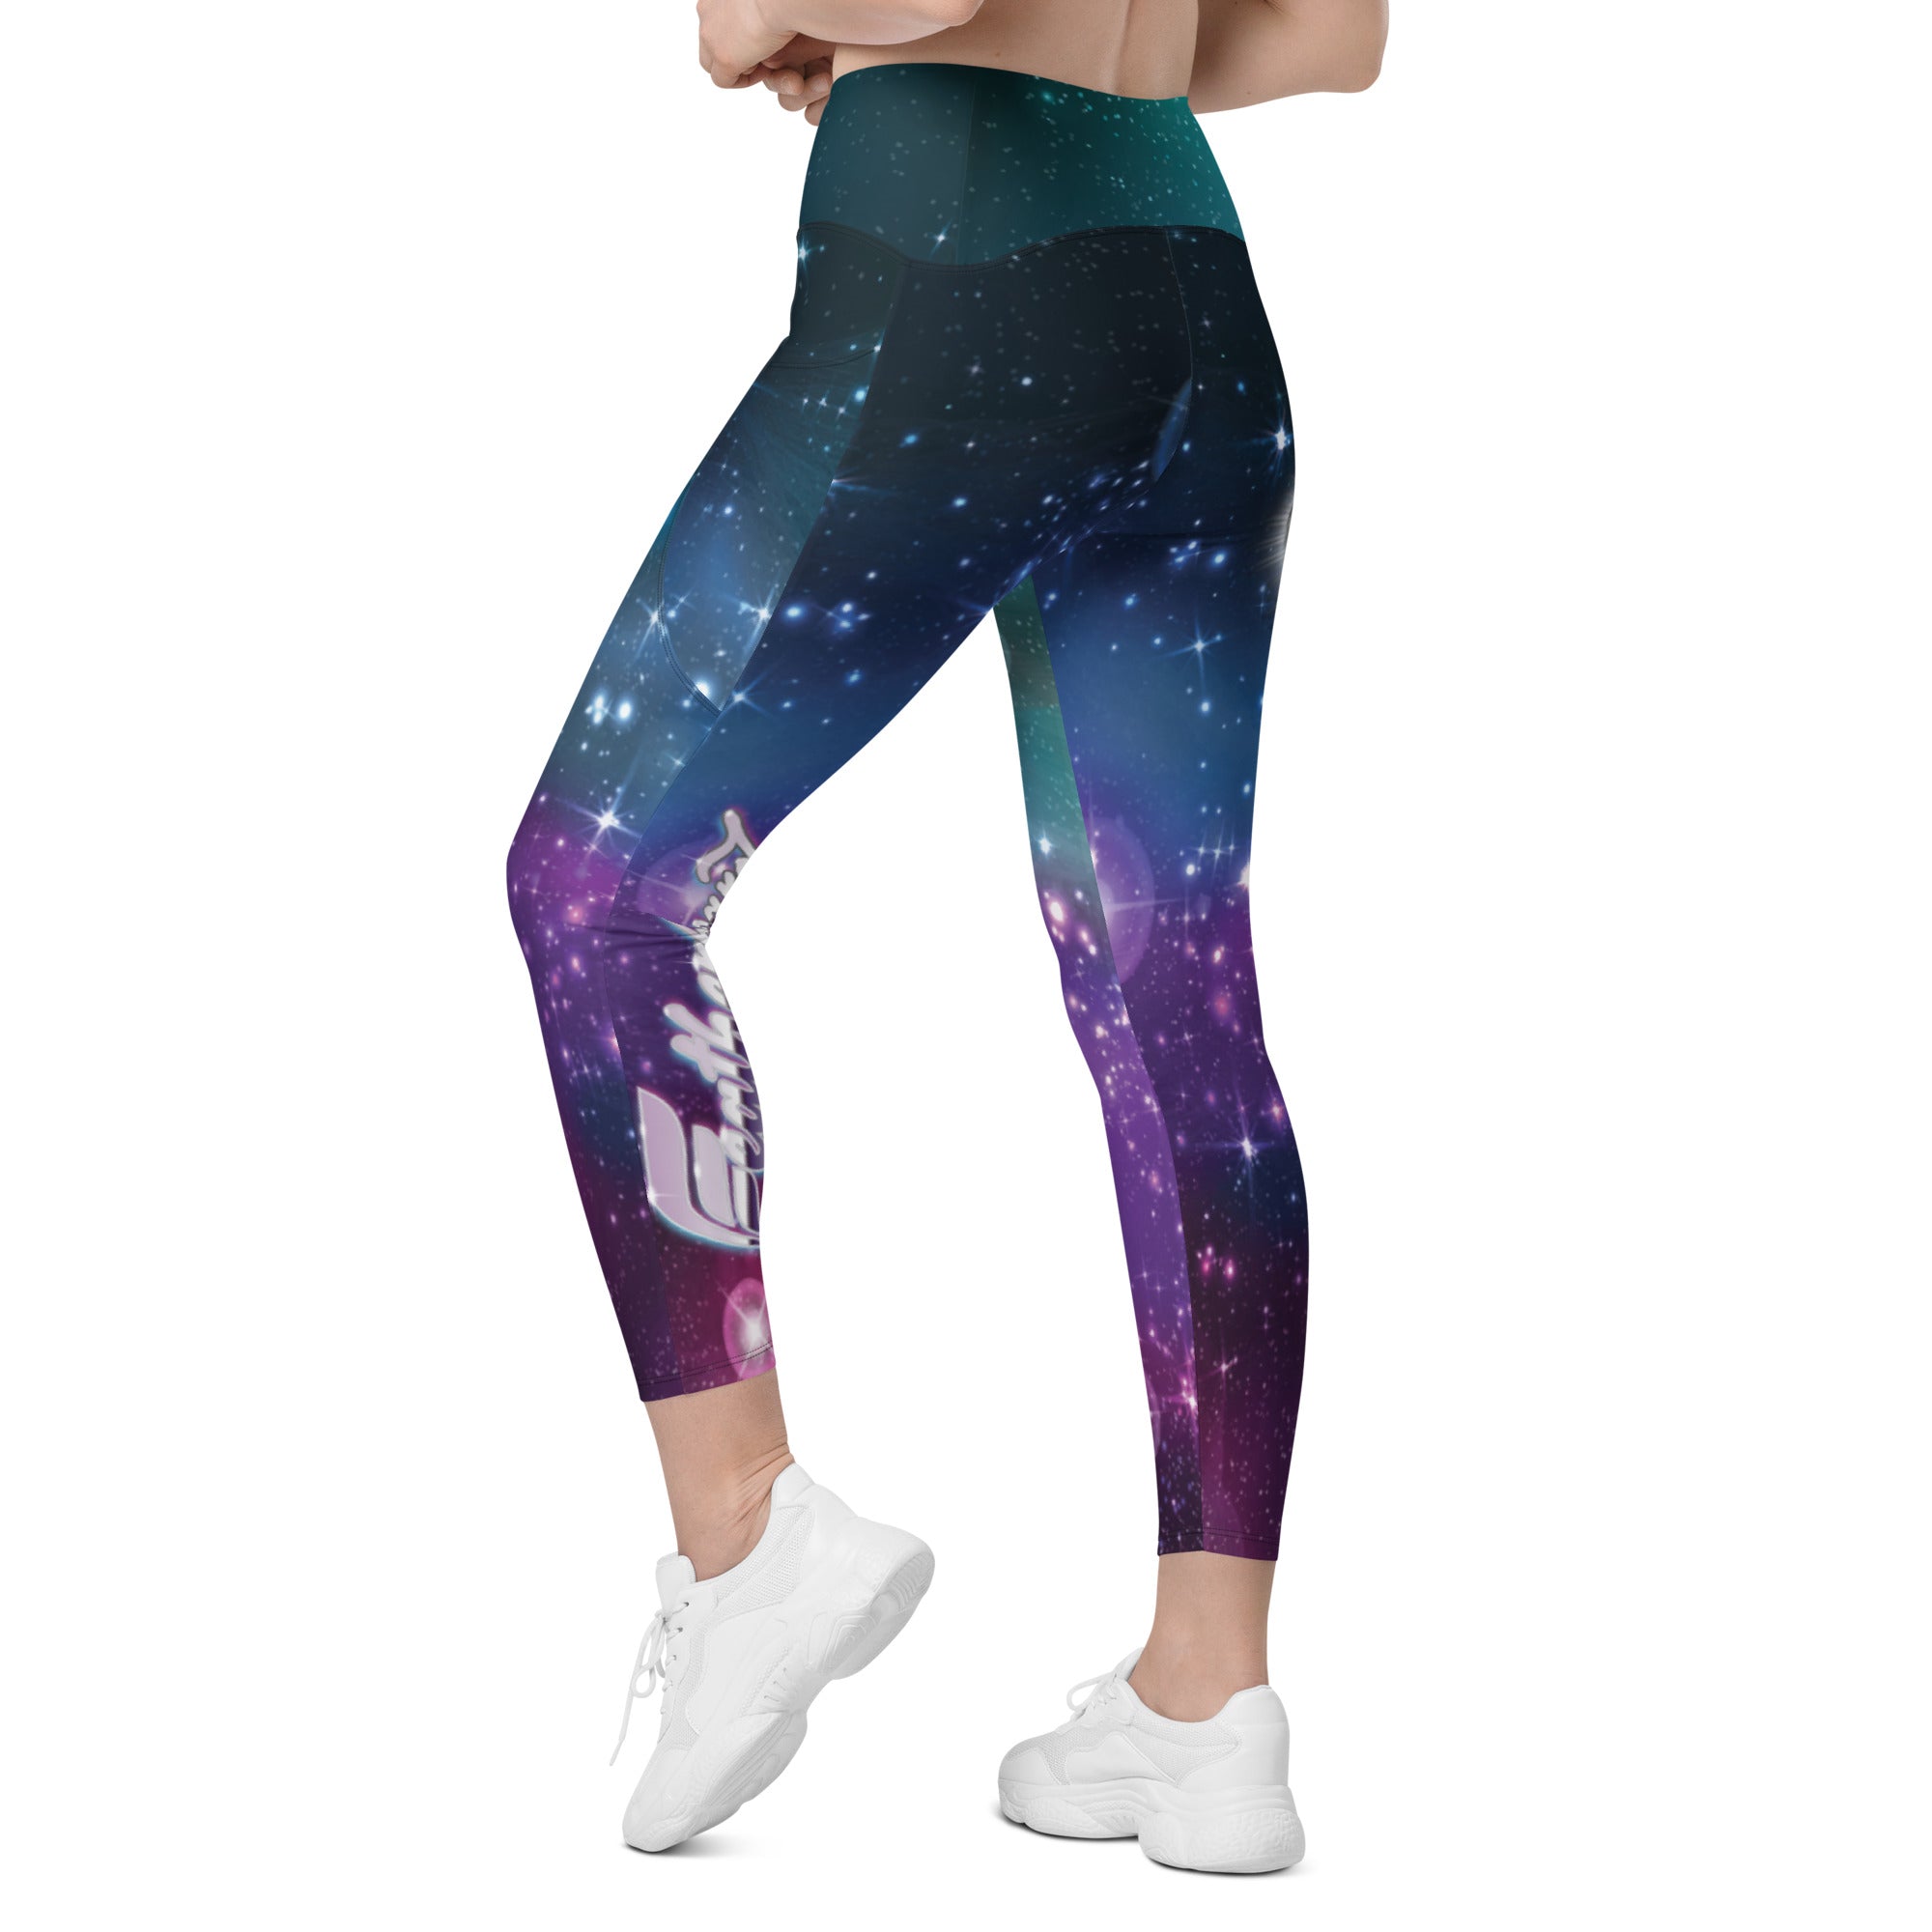 To The Moon Women's Leggings with Pockets